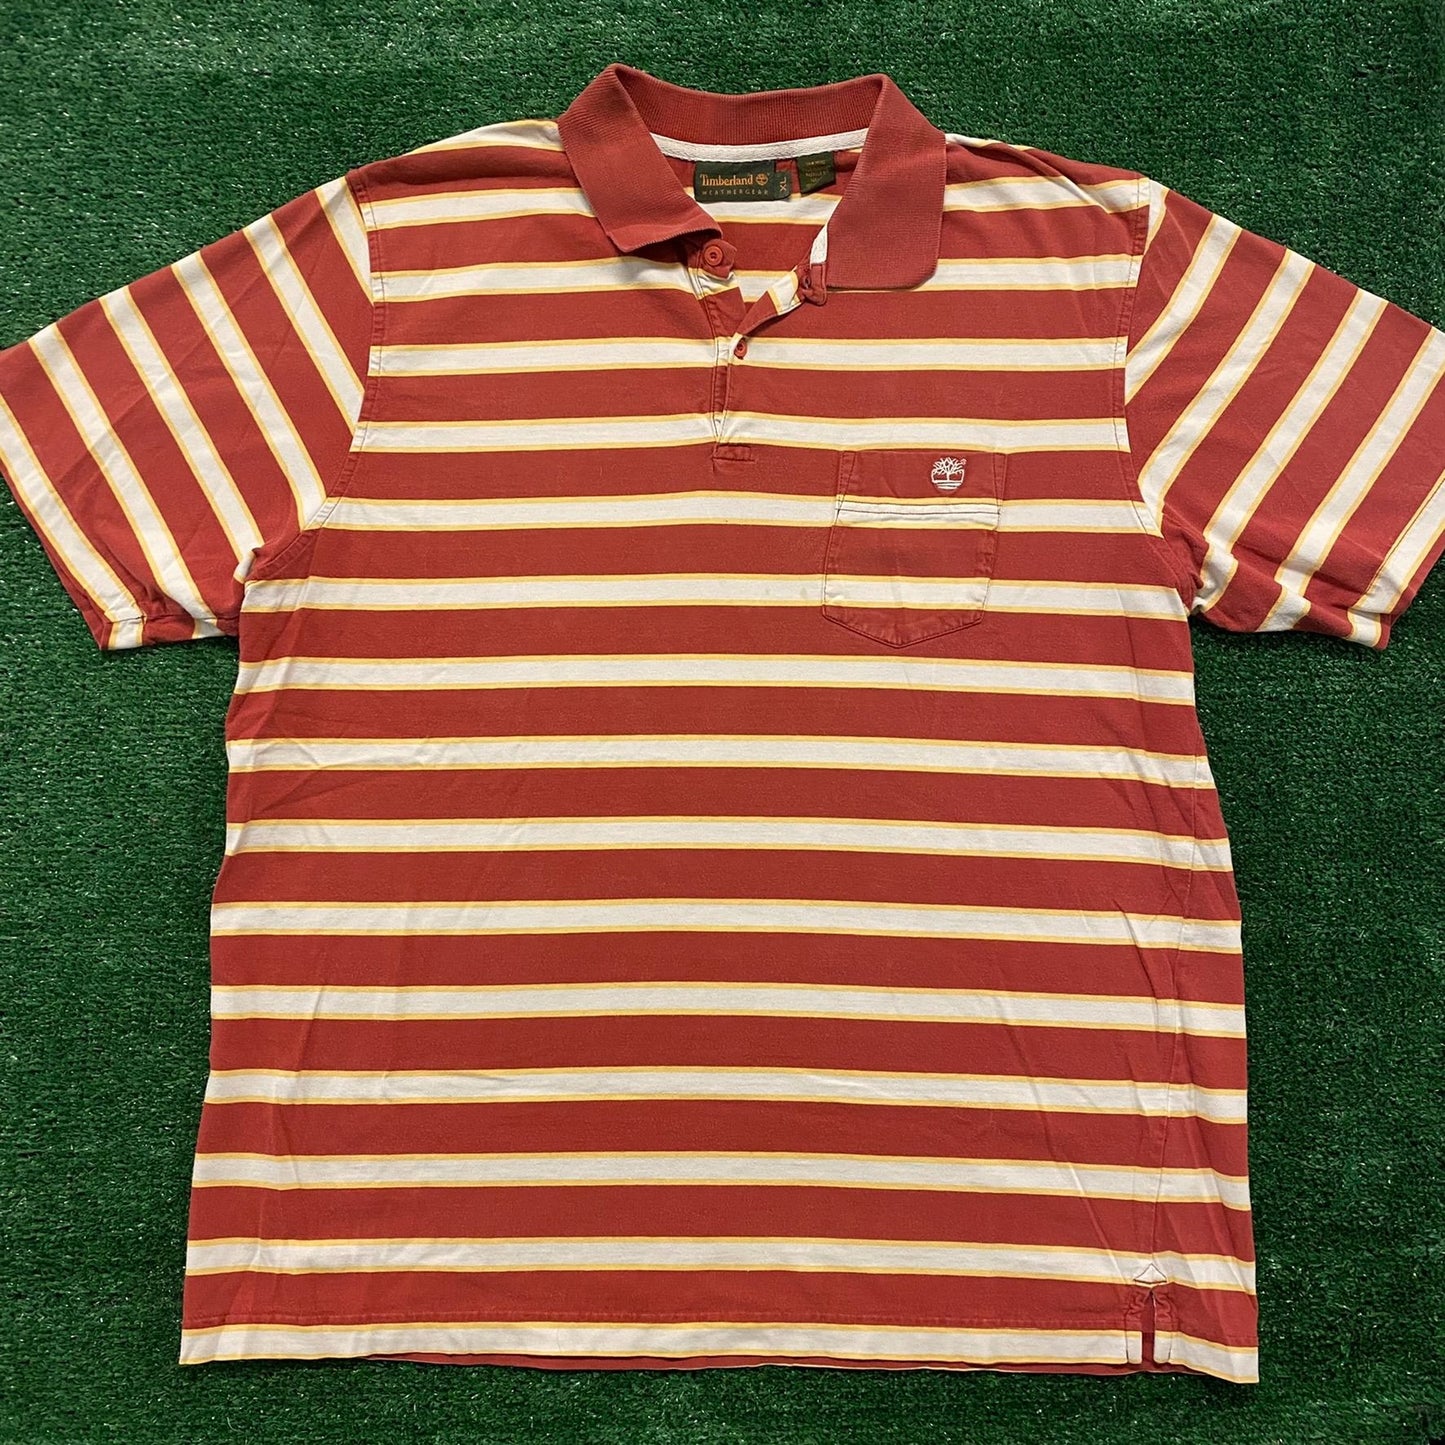 Timberland Striped Vintage Casual Polo Shirt